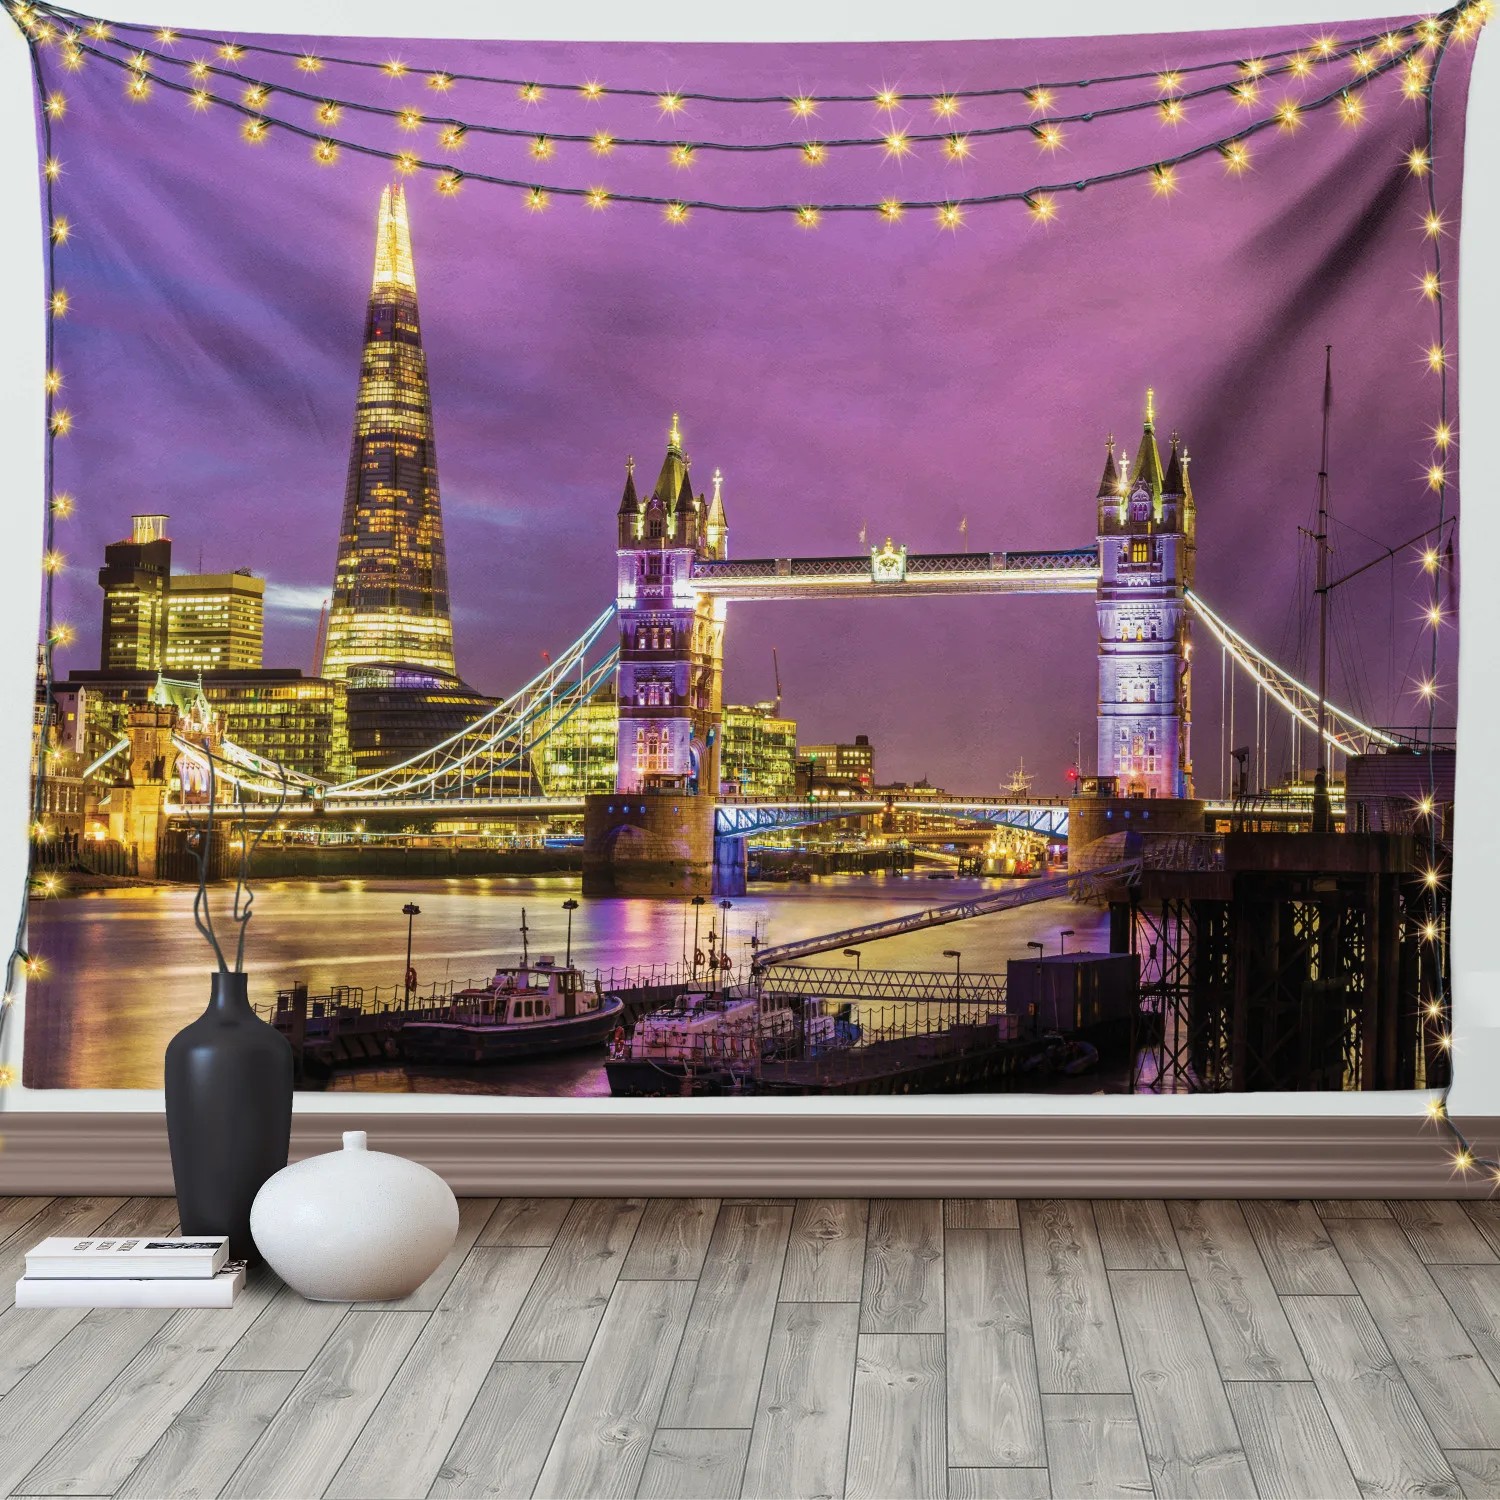 London Tapestry Tower Bridge at Purple Night Satin Fabric Wall Hanging for Bedroom Living Room Dorm Meeting Background |